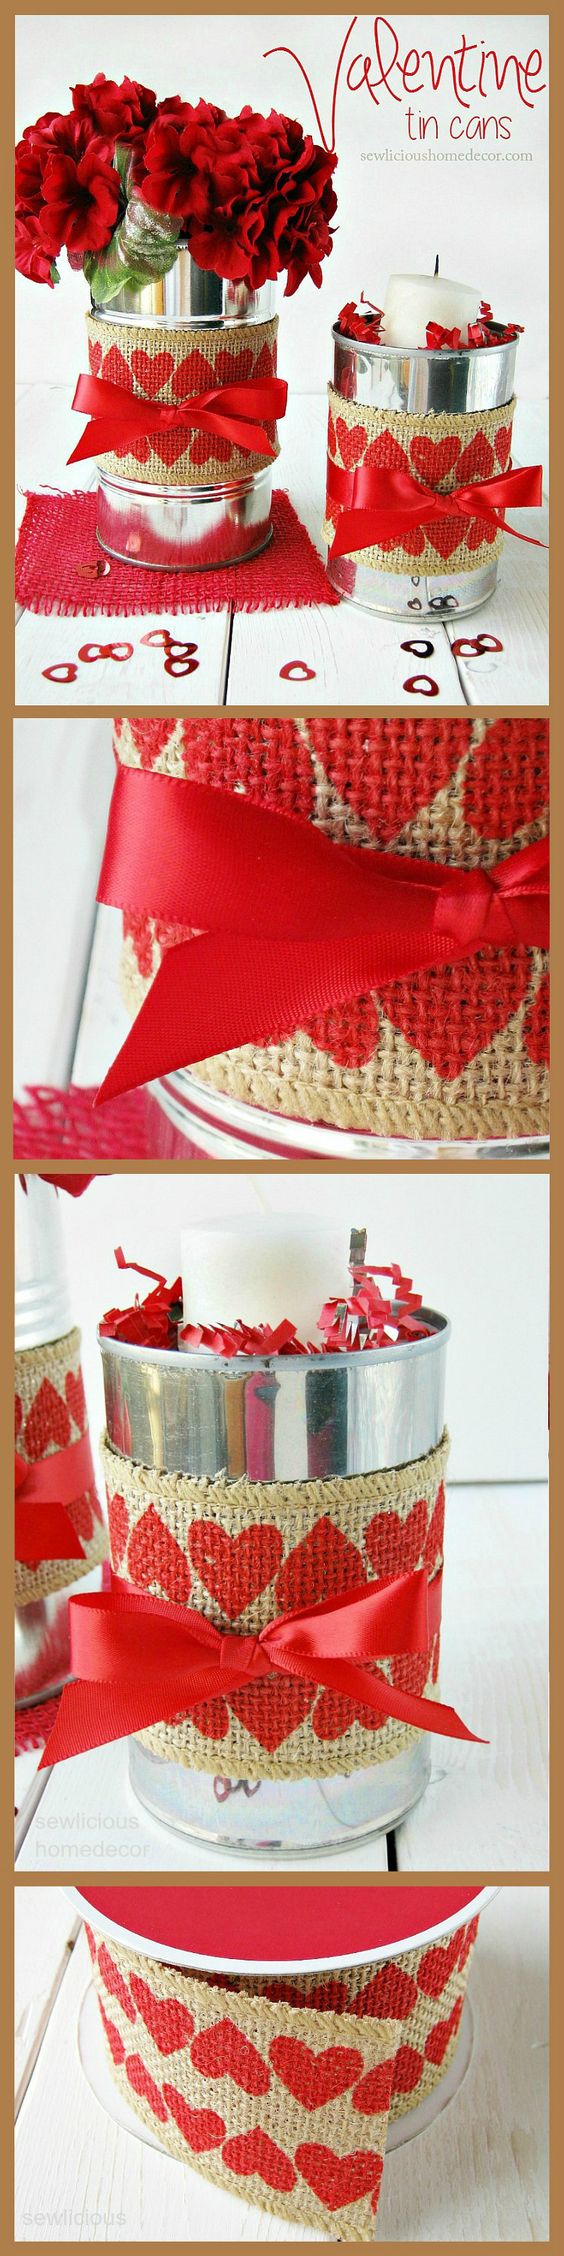 20 Awesome Ideas & Tutorials for Upcycling Tin Cans